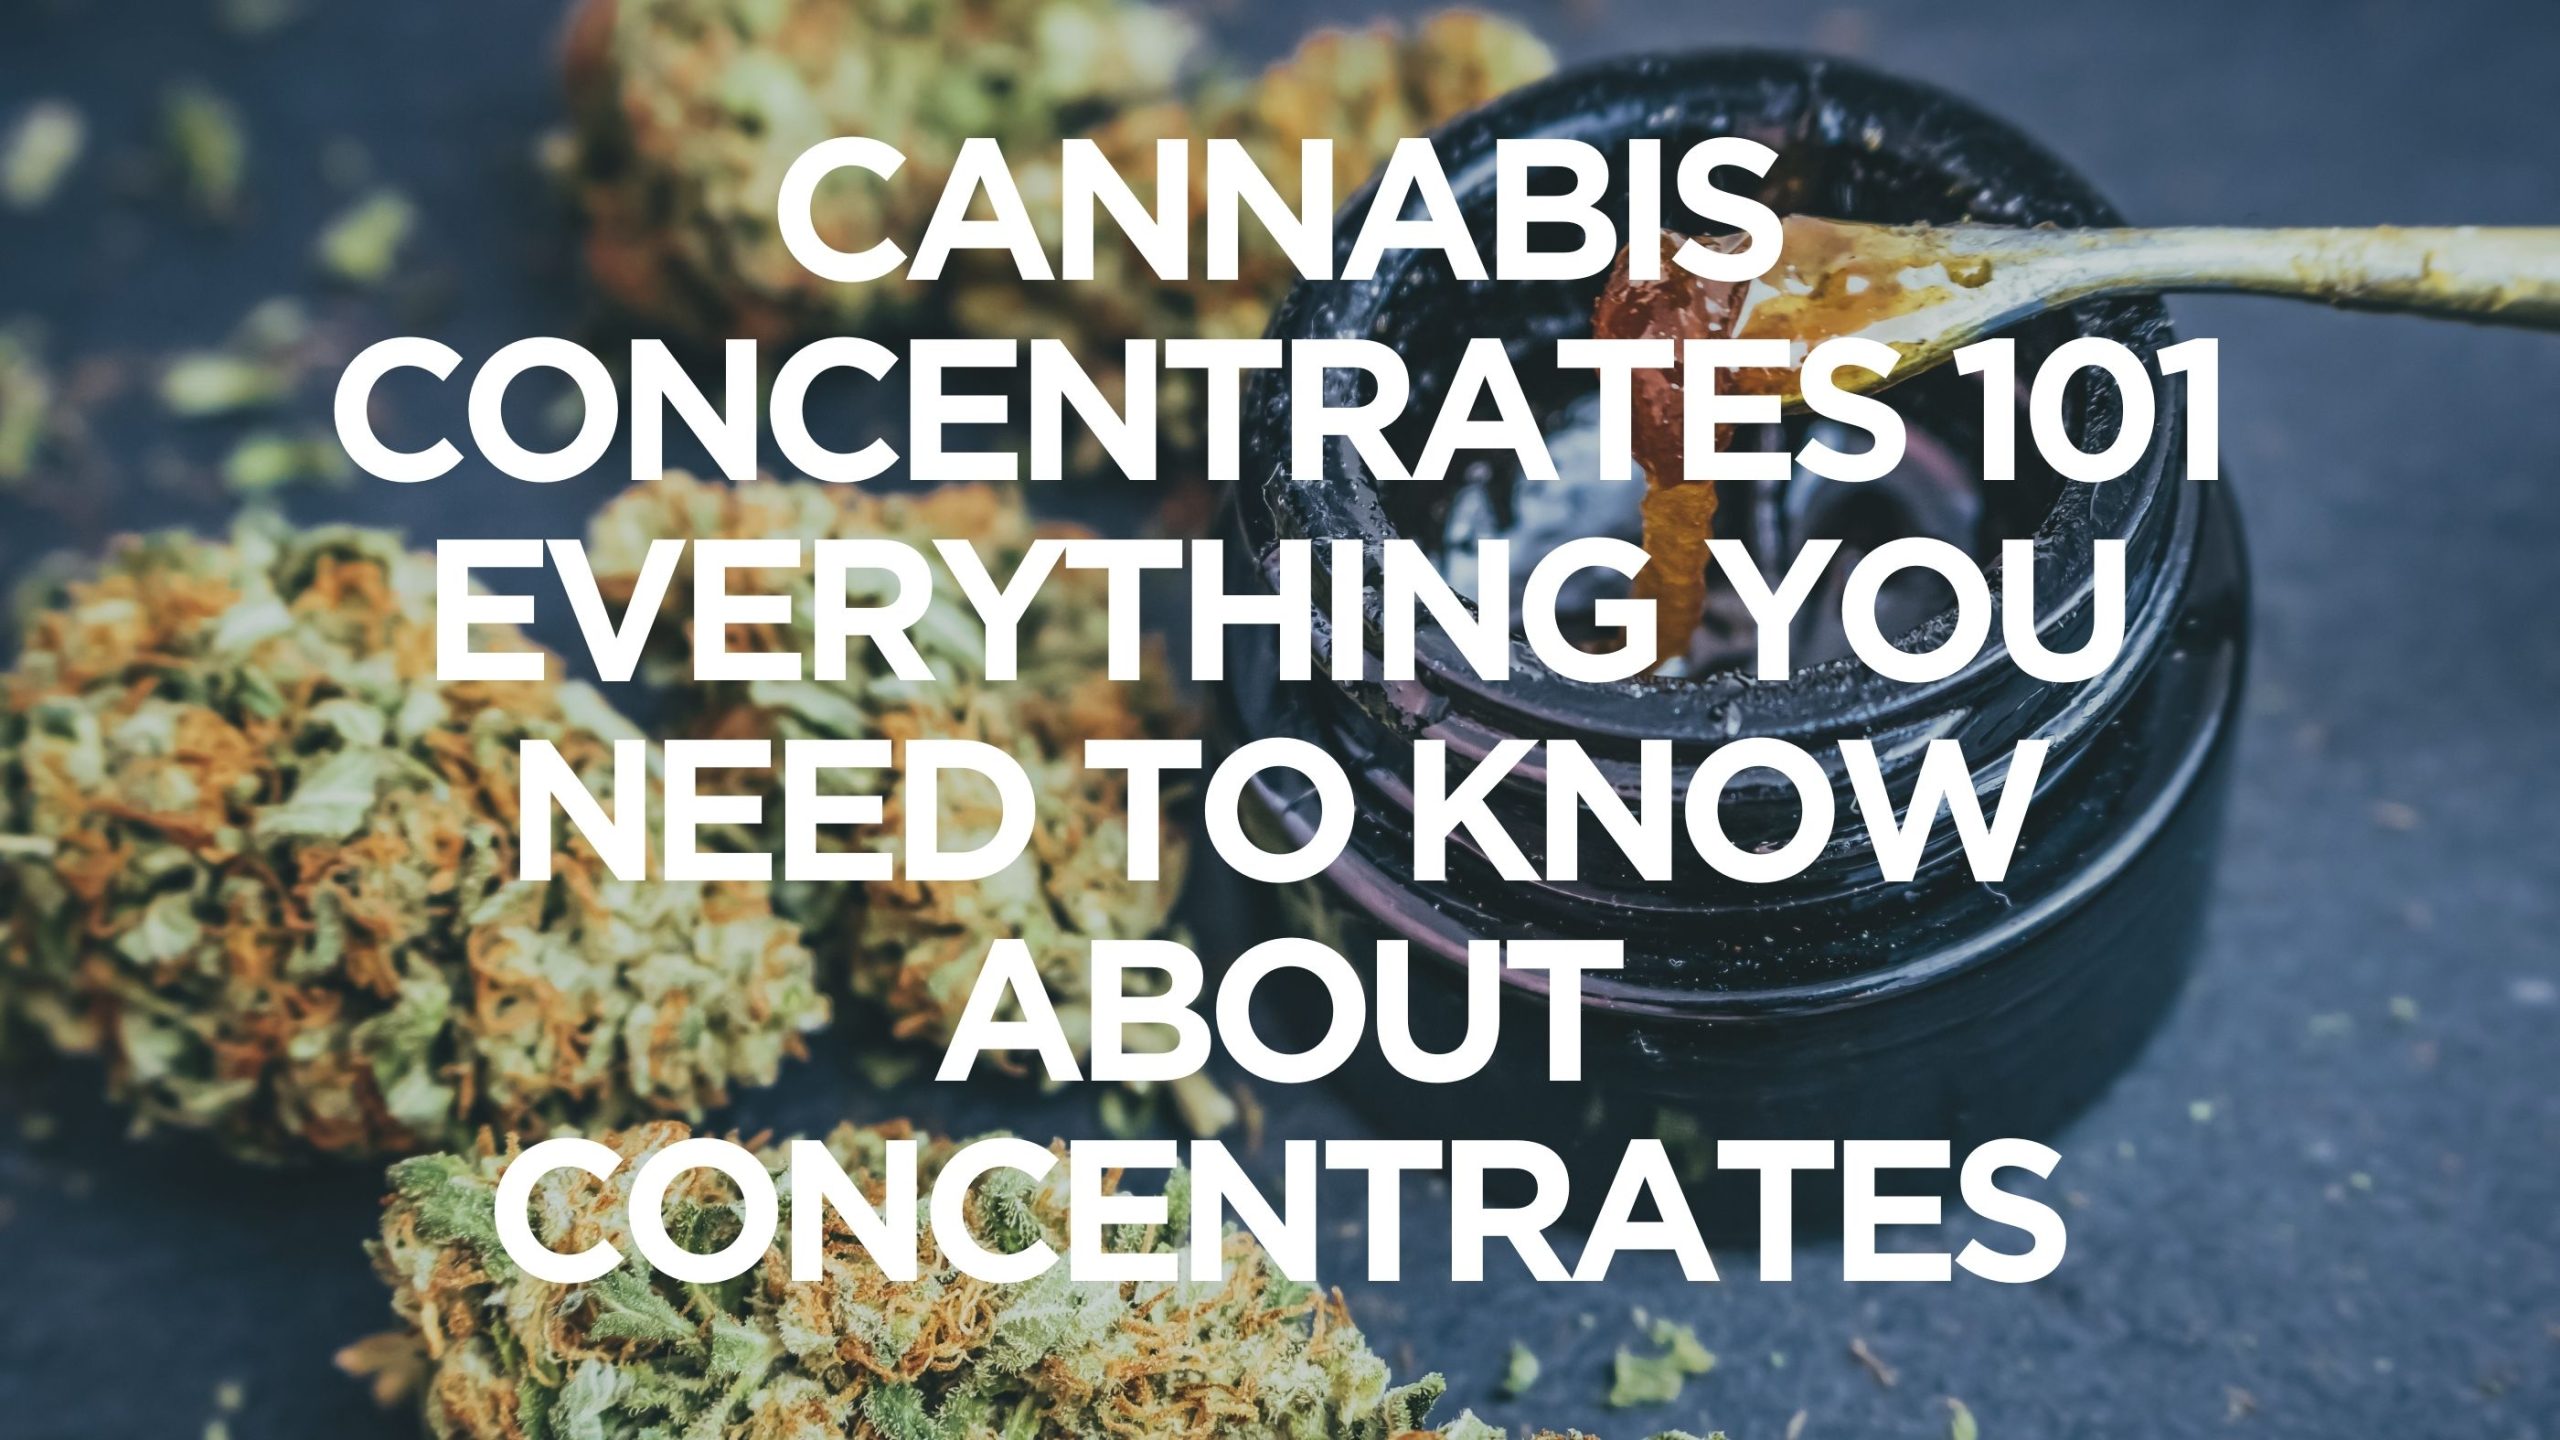 cannabis-concentrates-101-everything-you-need-to-know-about-concentrates